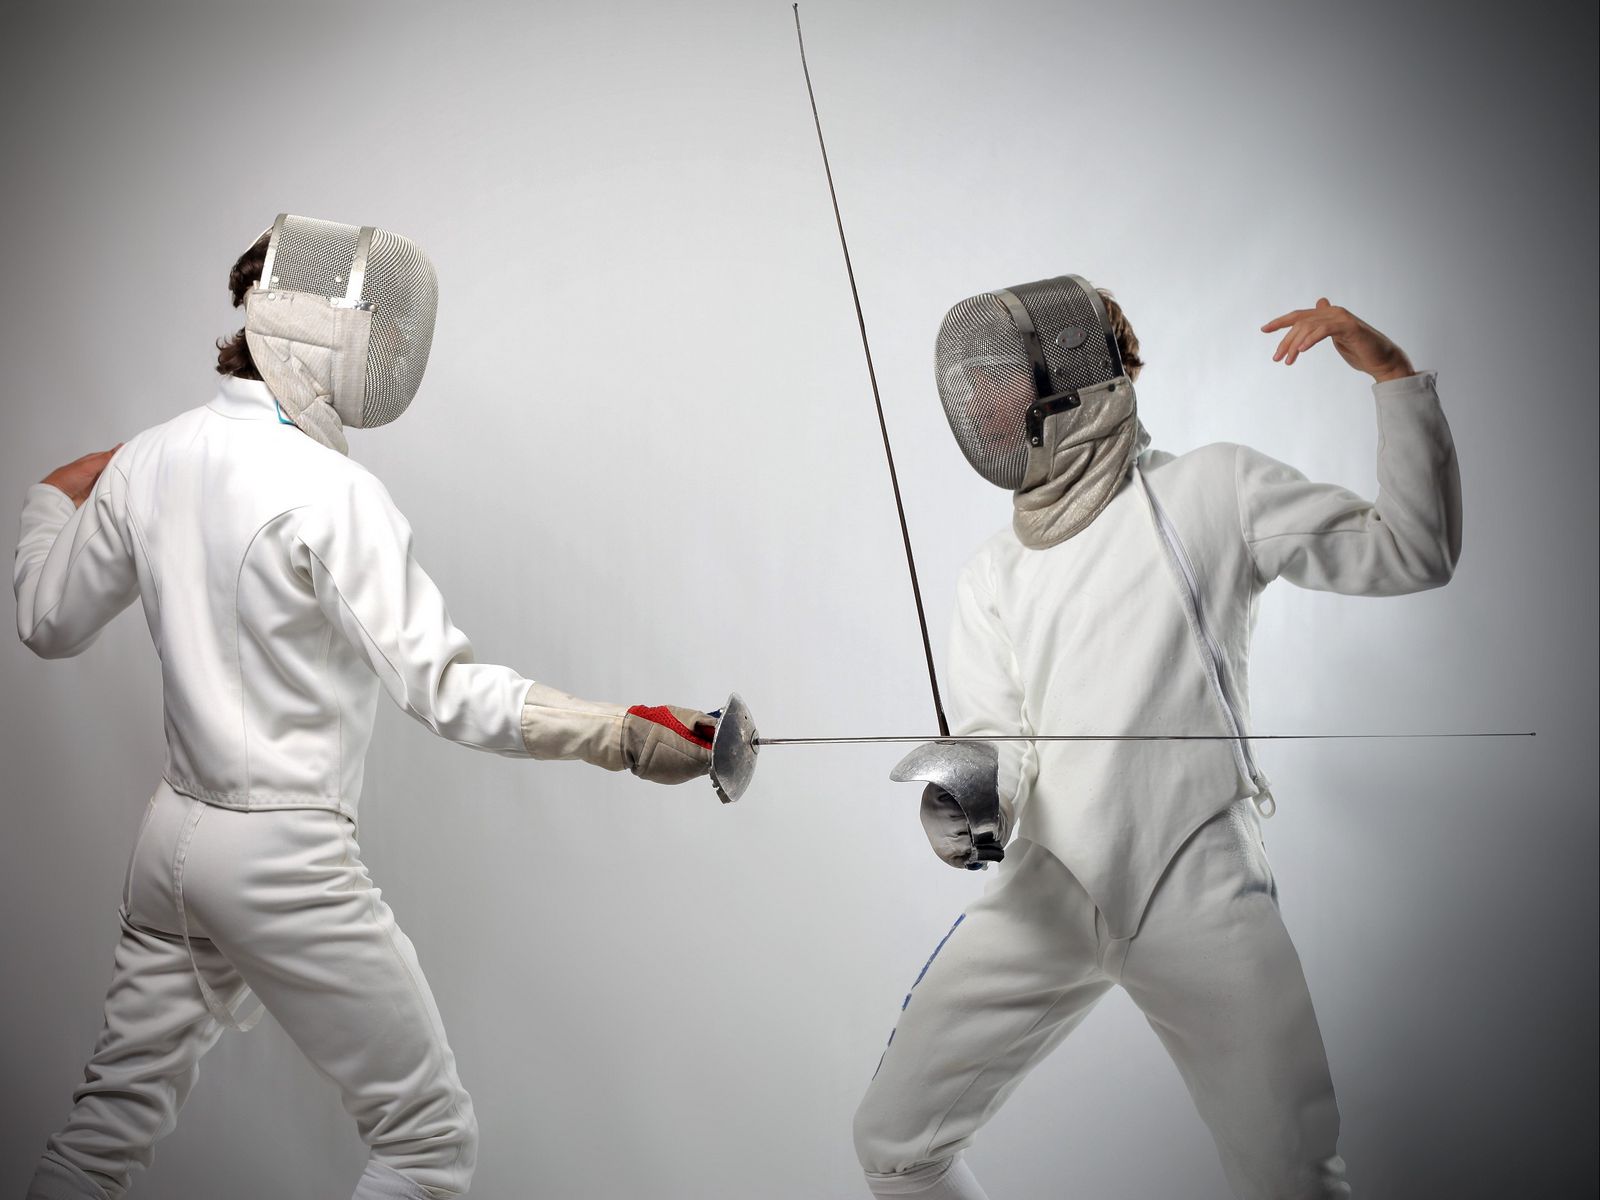 Download wallpaper 1600x1200 fencing, sports, white background standard 4:3 HD background